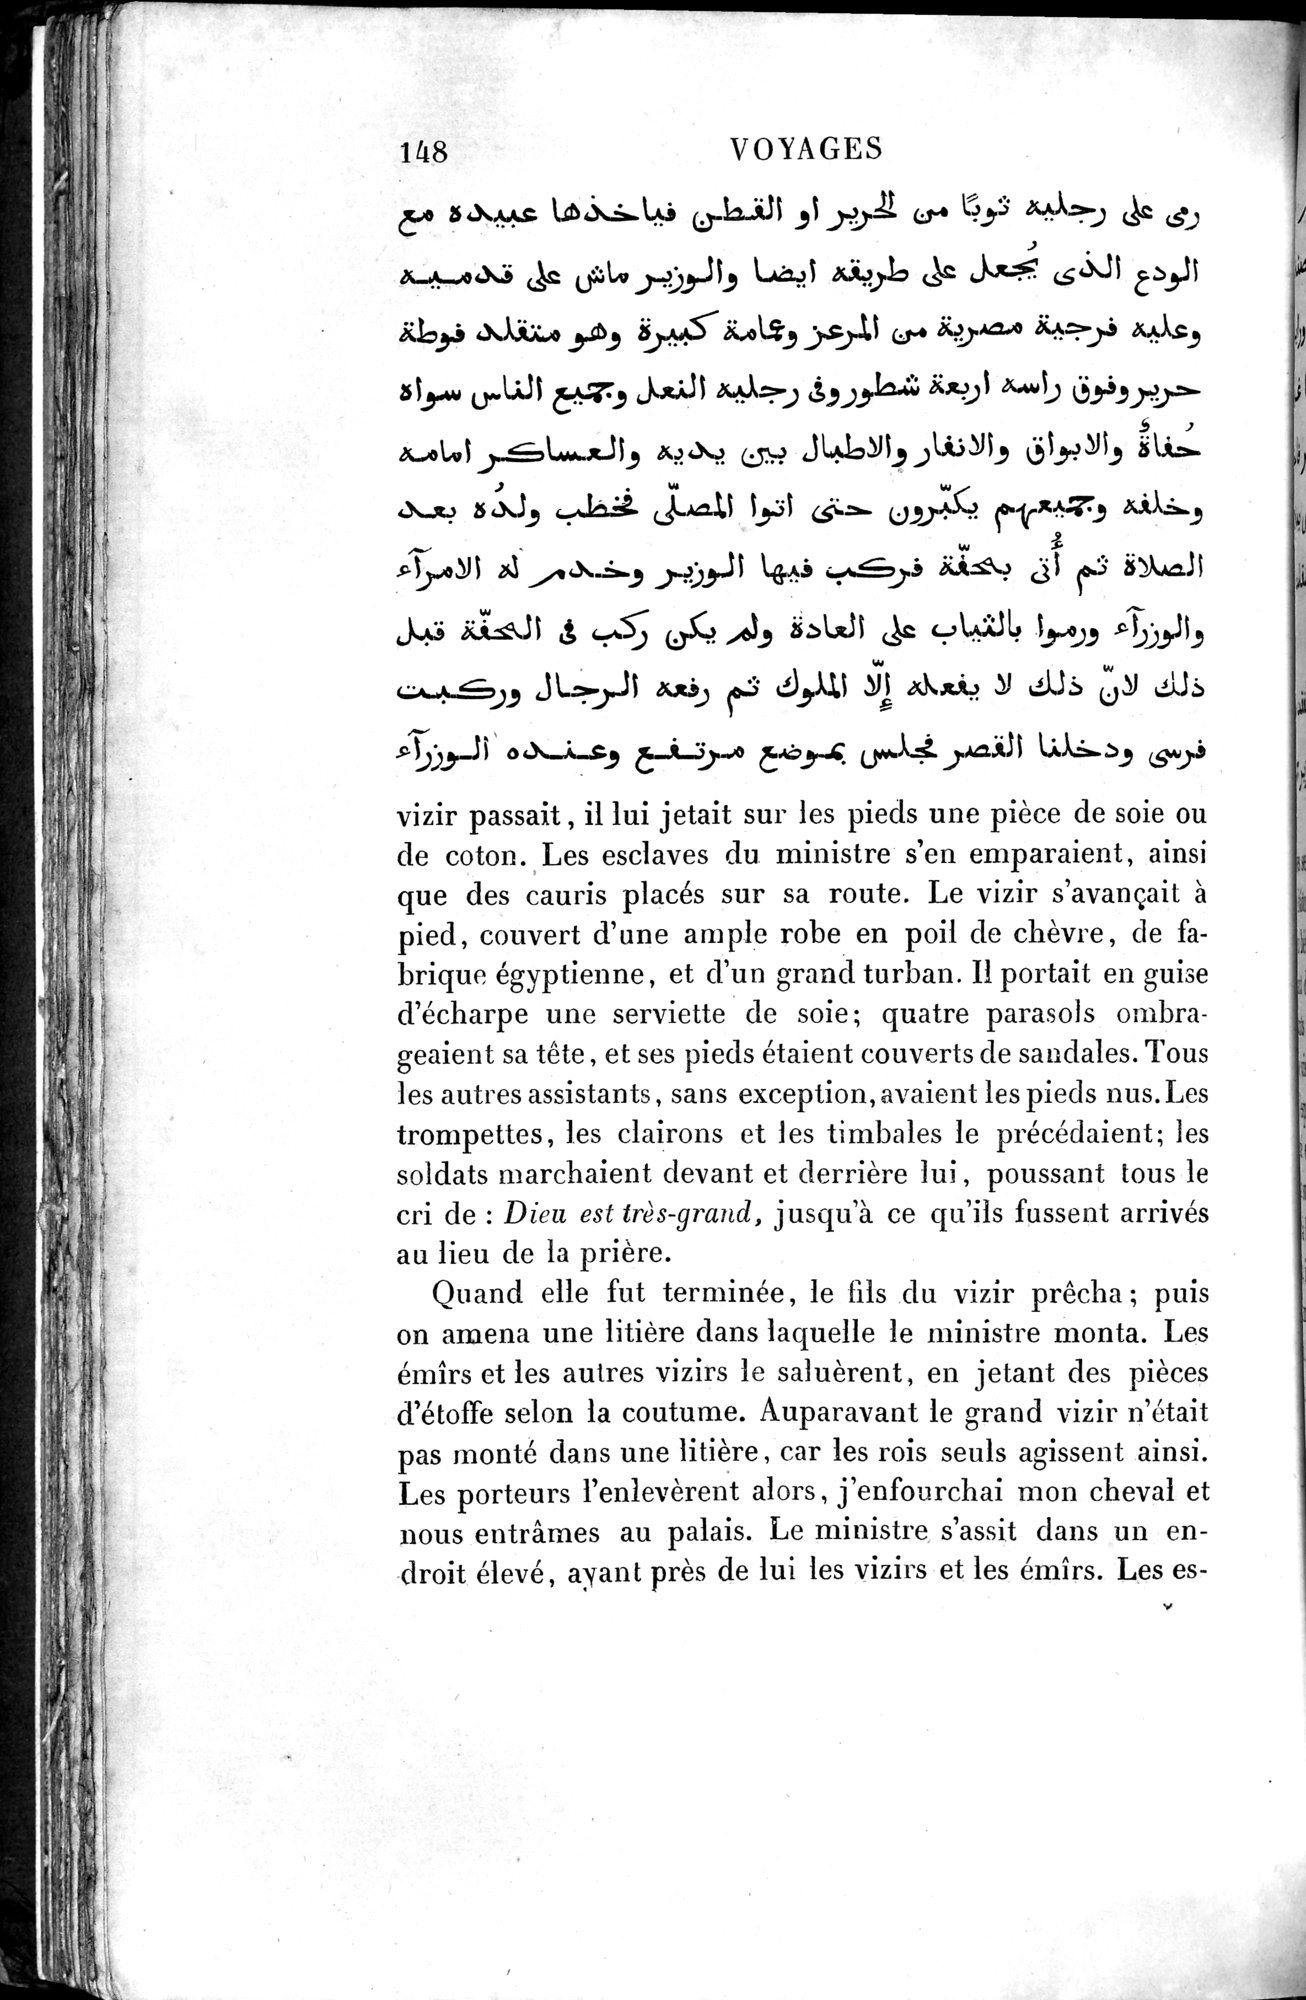 Voyages d'Ibn Batoutah : vol.4 / Page 160 (Grayscale High Resolution Image)